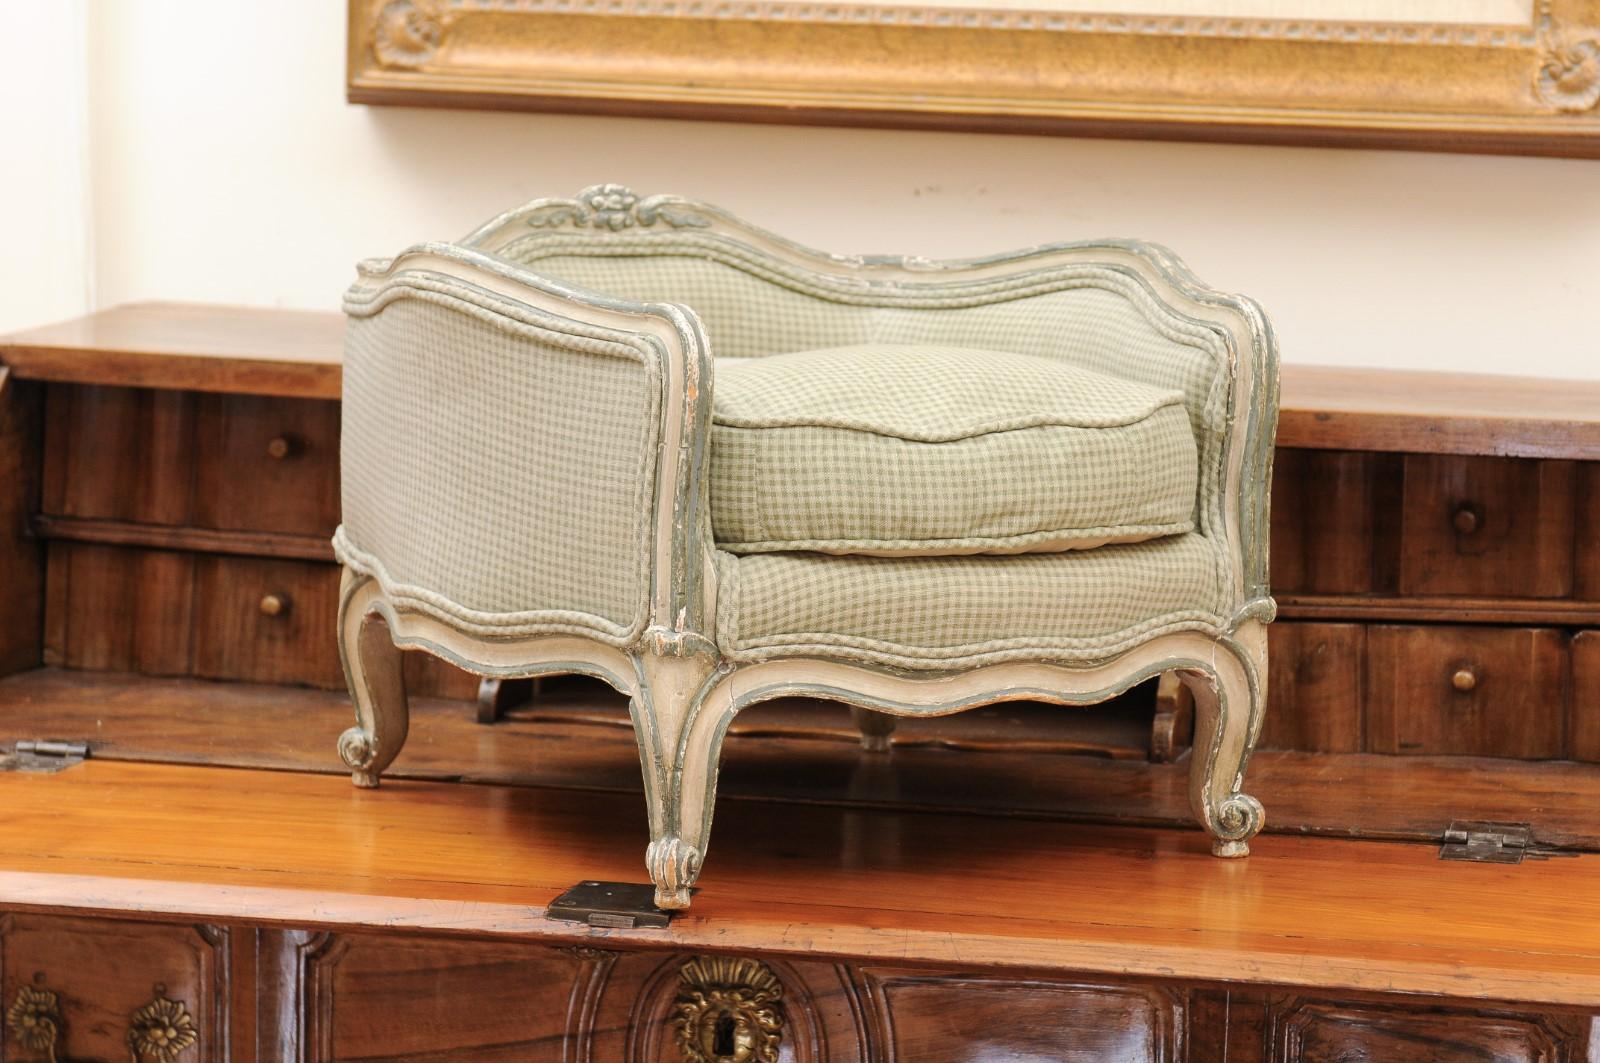 A French Louis XV style painted dog bed from the late 19th century, with cabriole legs and new upholstery. Created in France during the last quarter of the 19th century, this painted dog bed features a sinuous back topped with a carved motif,